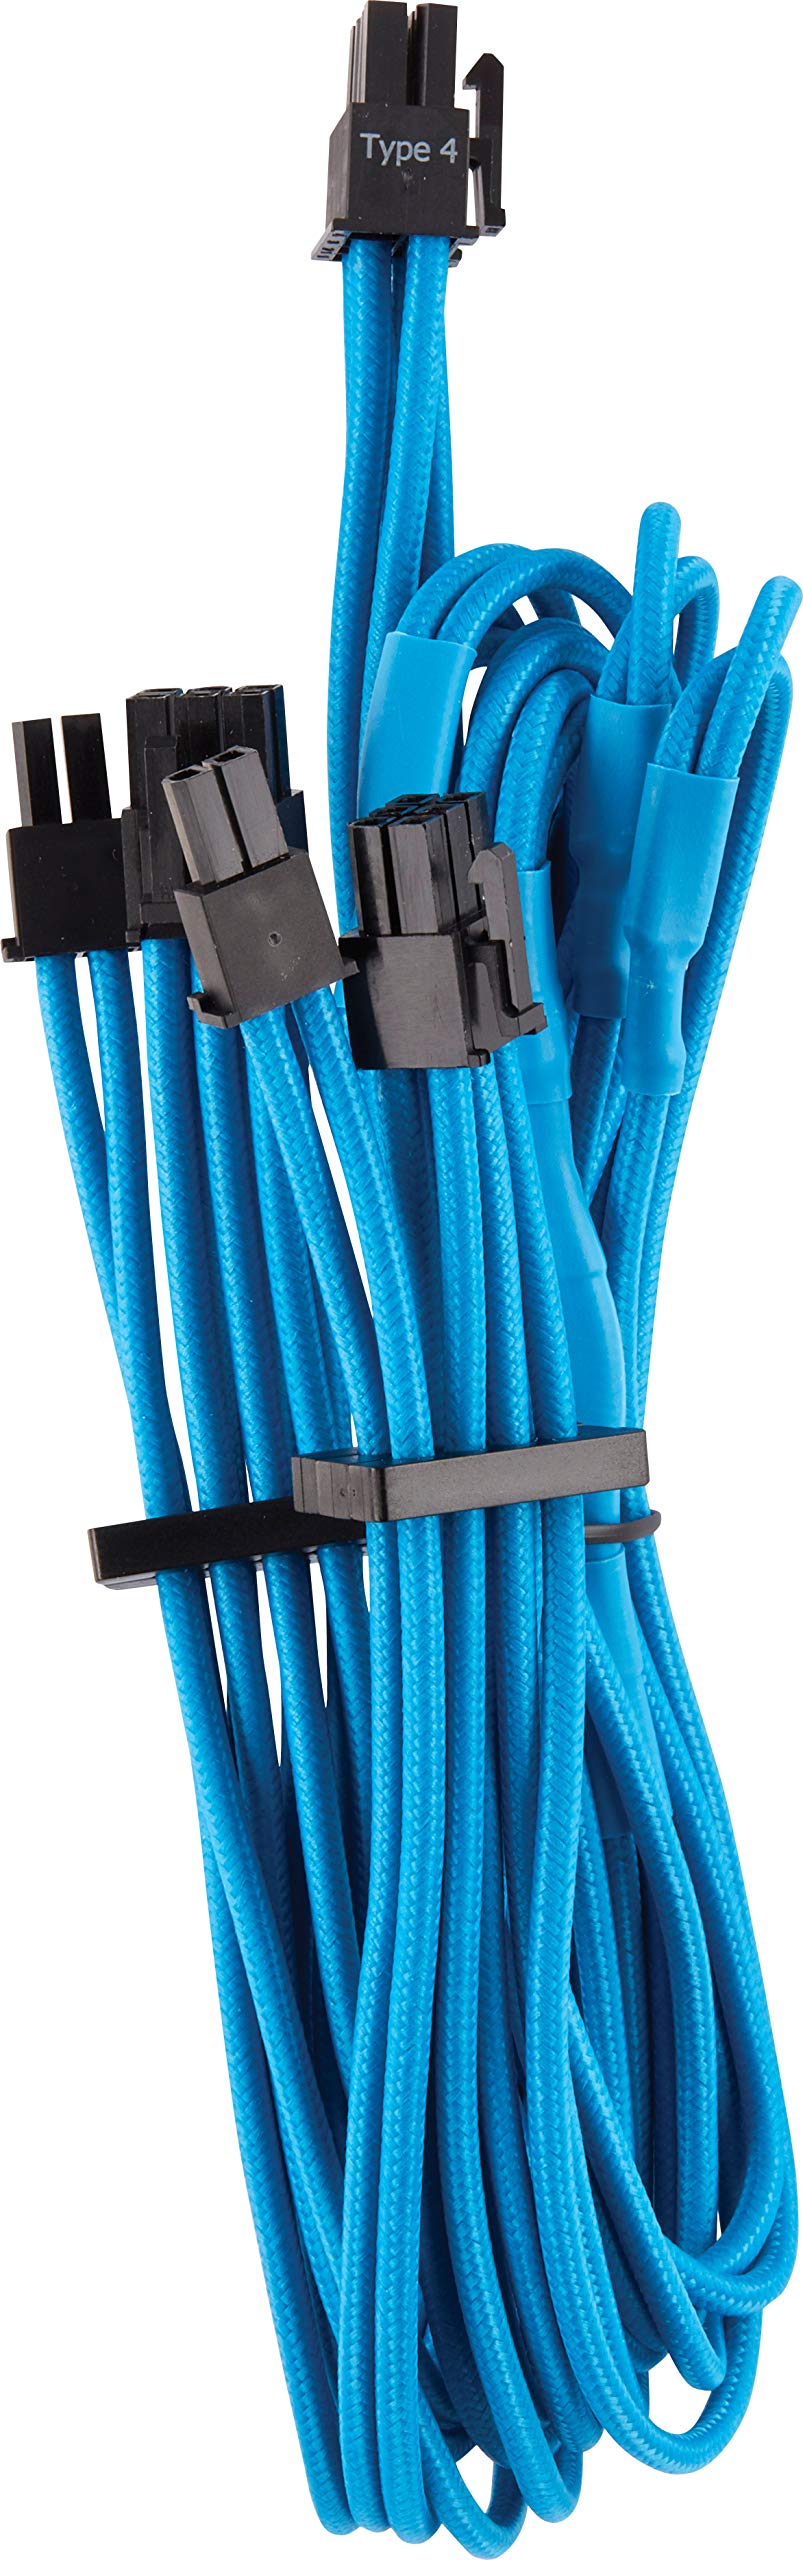  [AUSTRALIA] - CORSAIR Premium Individually Sleeved PCIe (Dual Connector) Cables – Blue, 2 Yr Warranty, for Corsair PSUs